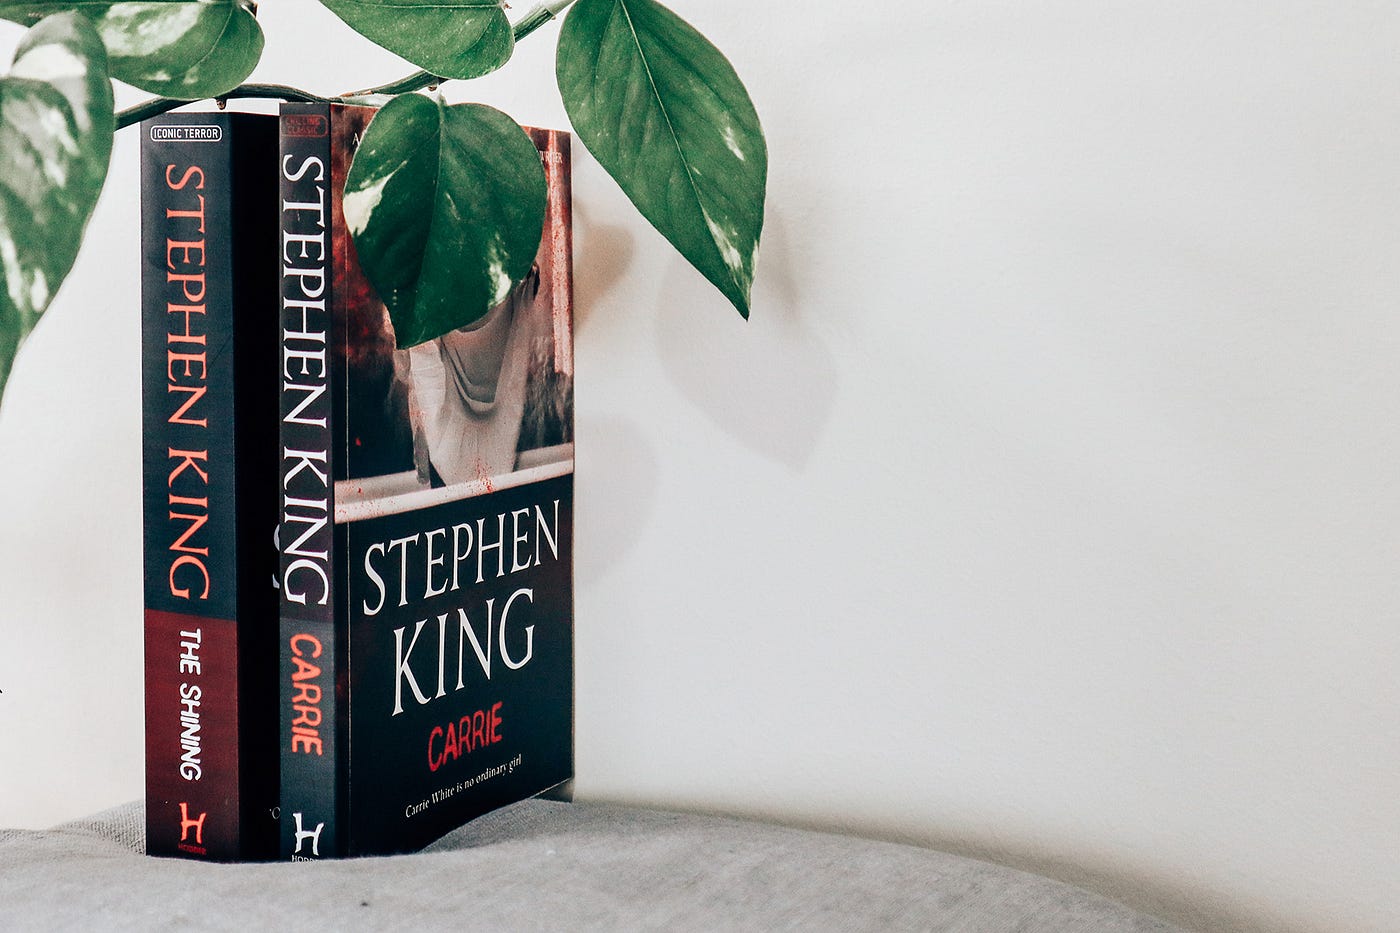 How to Set the Mood. The Shining by Stephen King is…